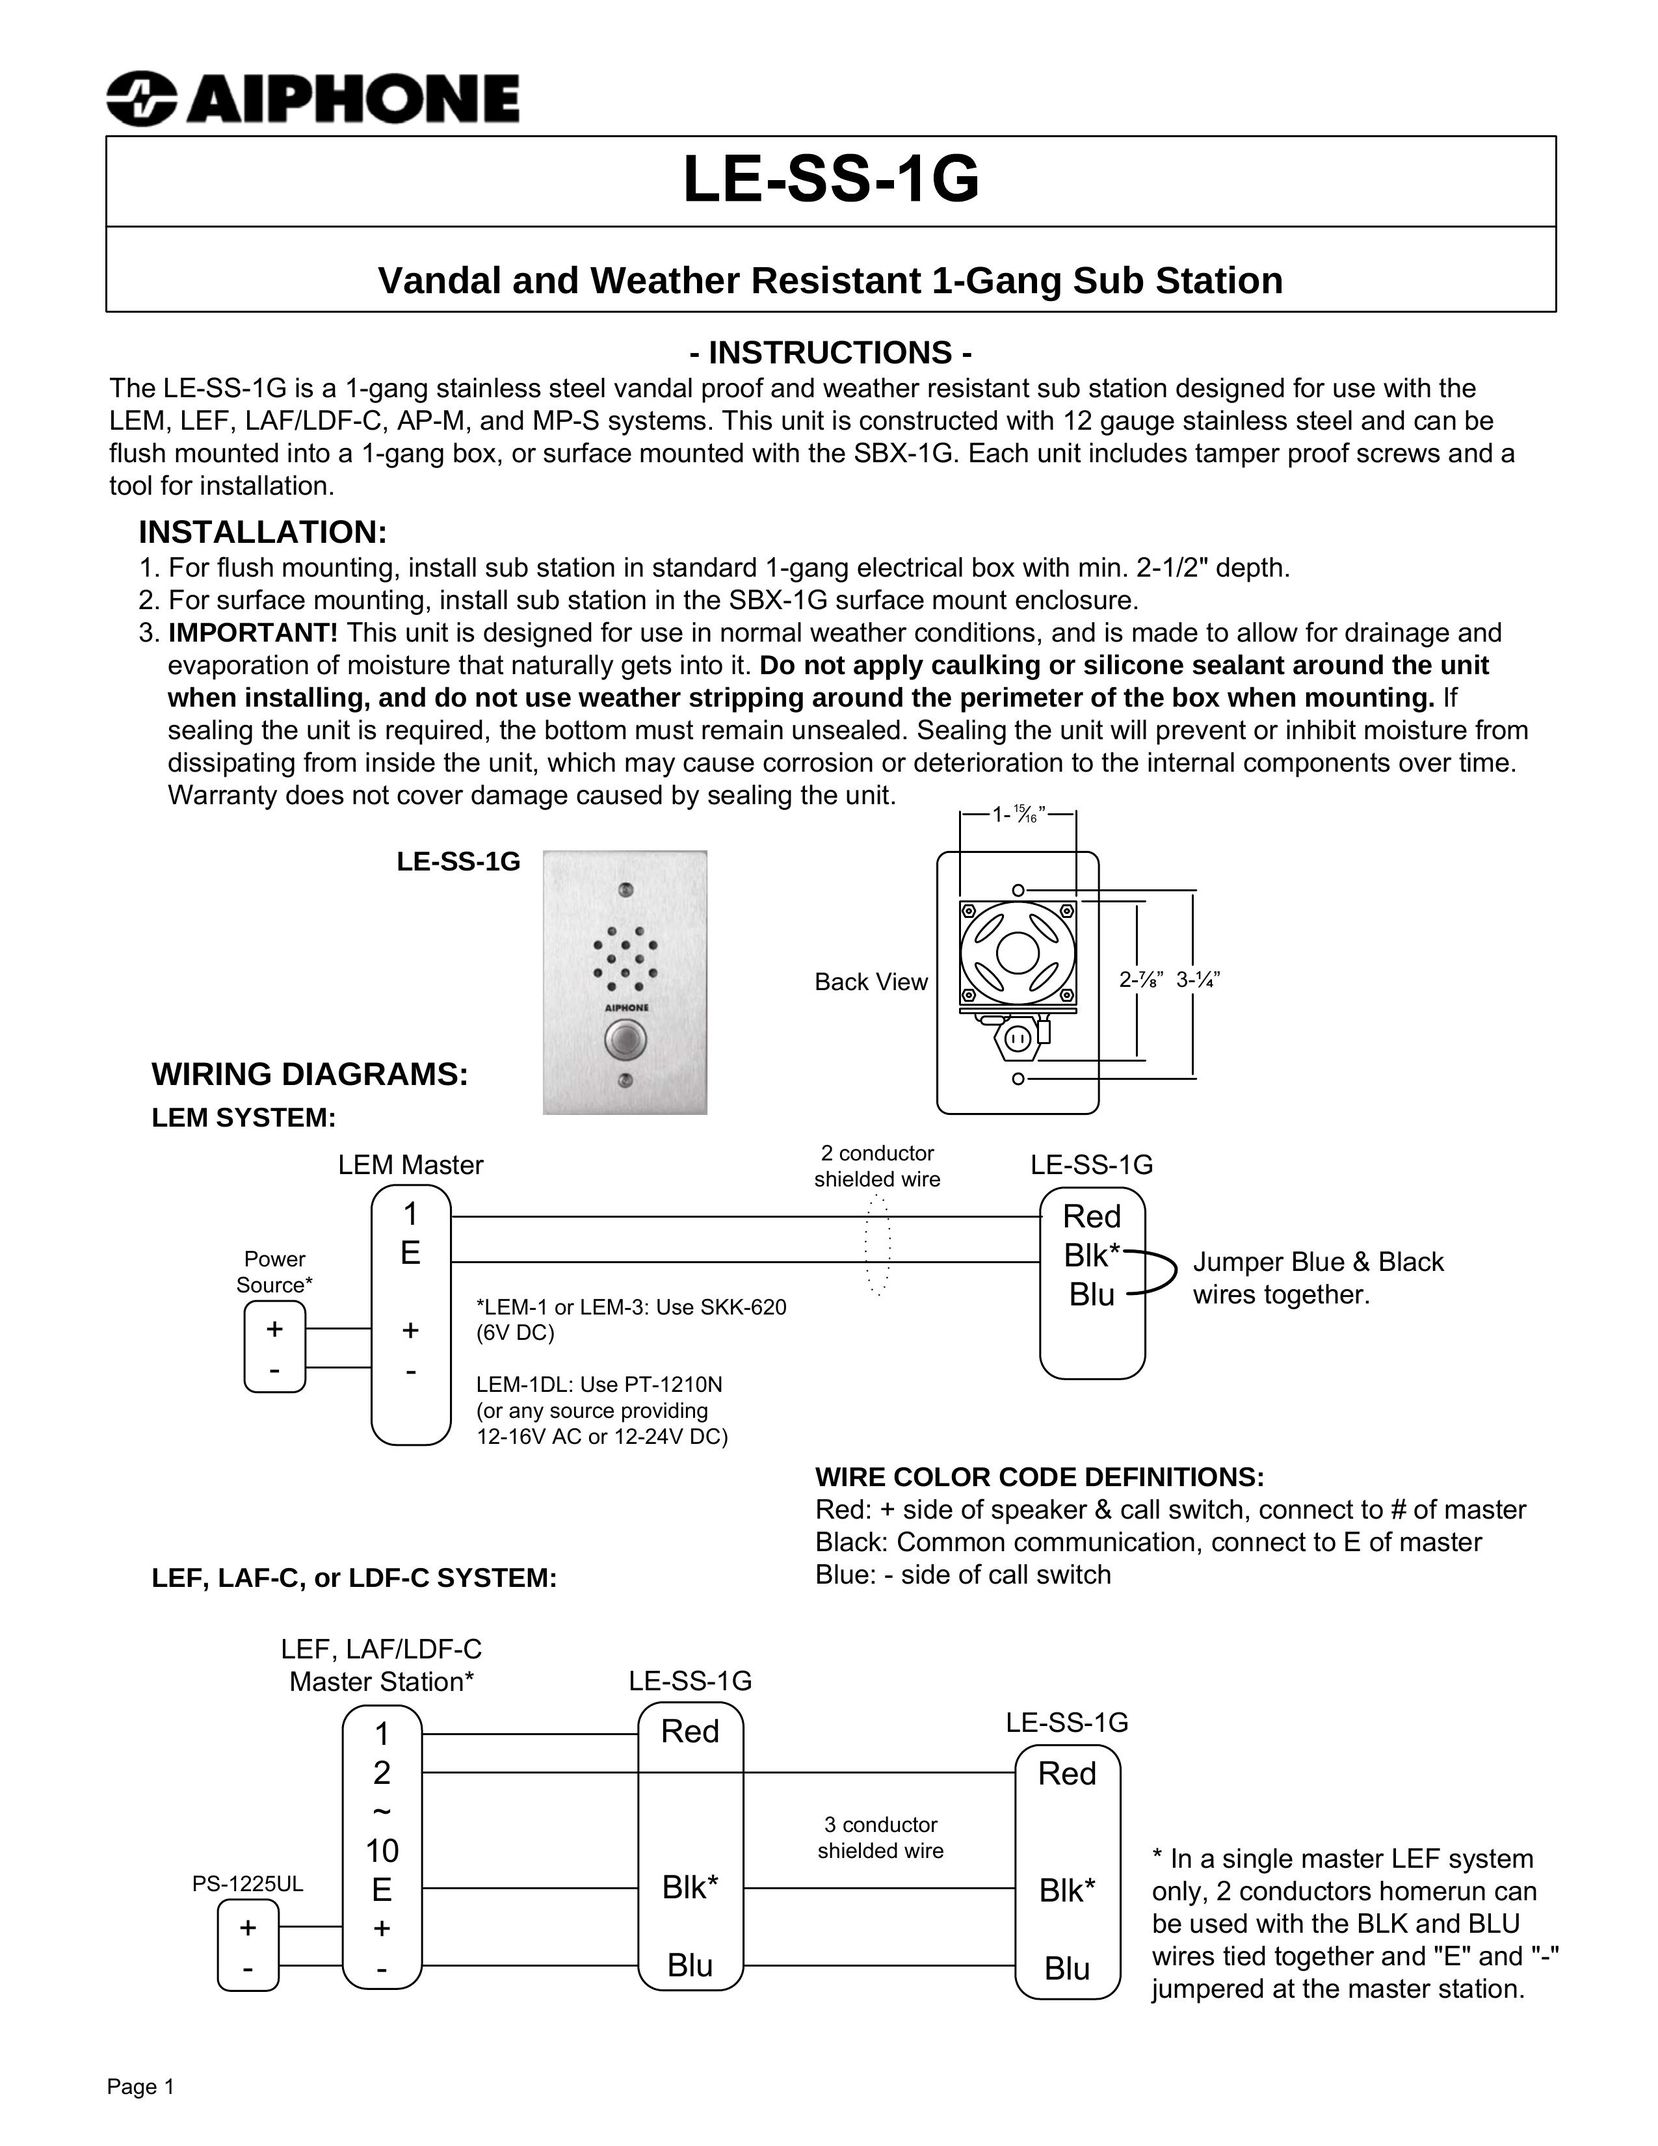 Aiphone LE-SS-1G Welder User Manual